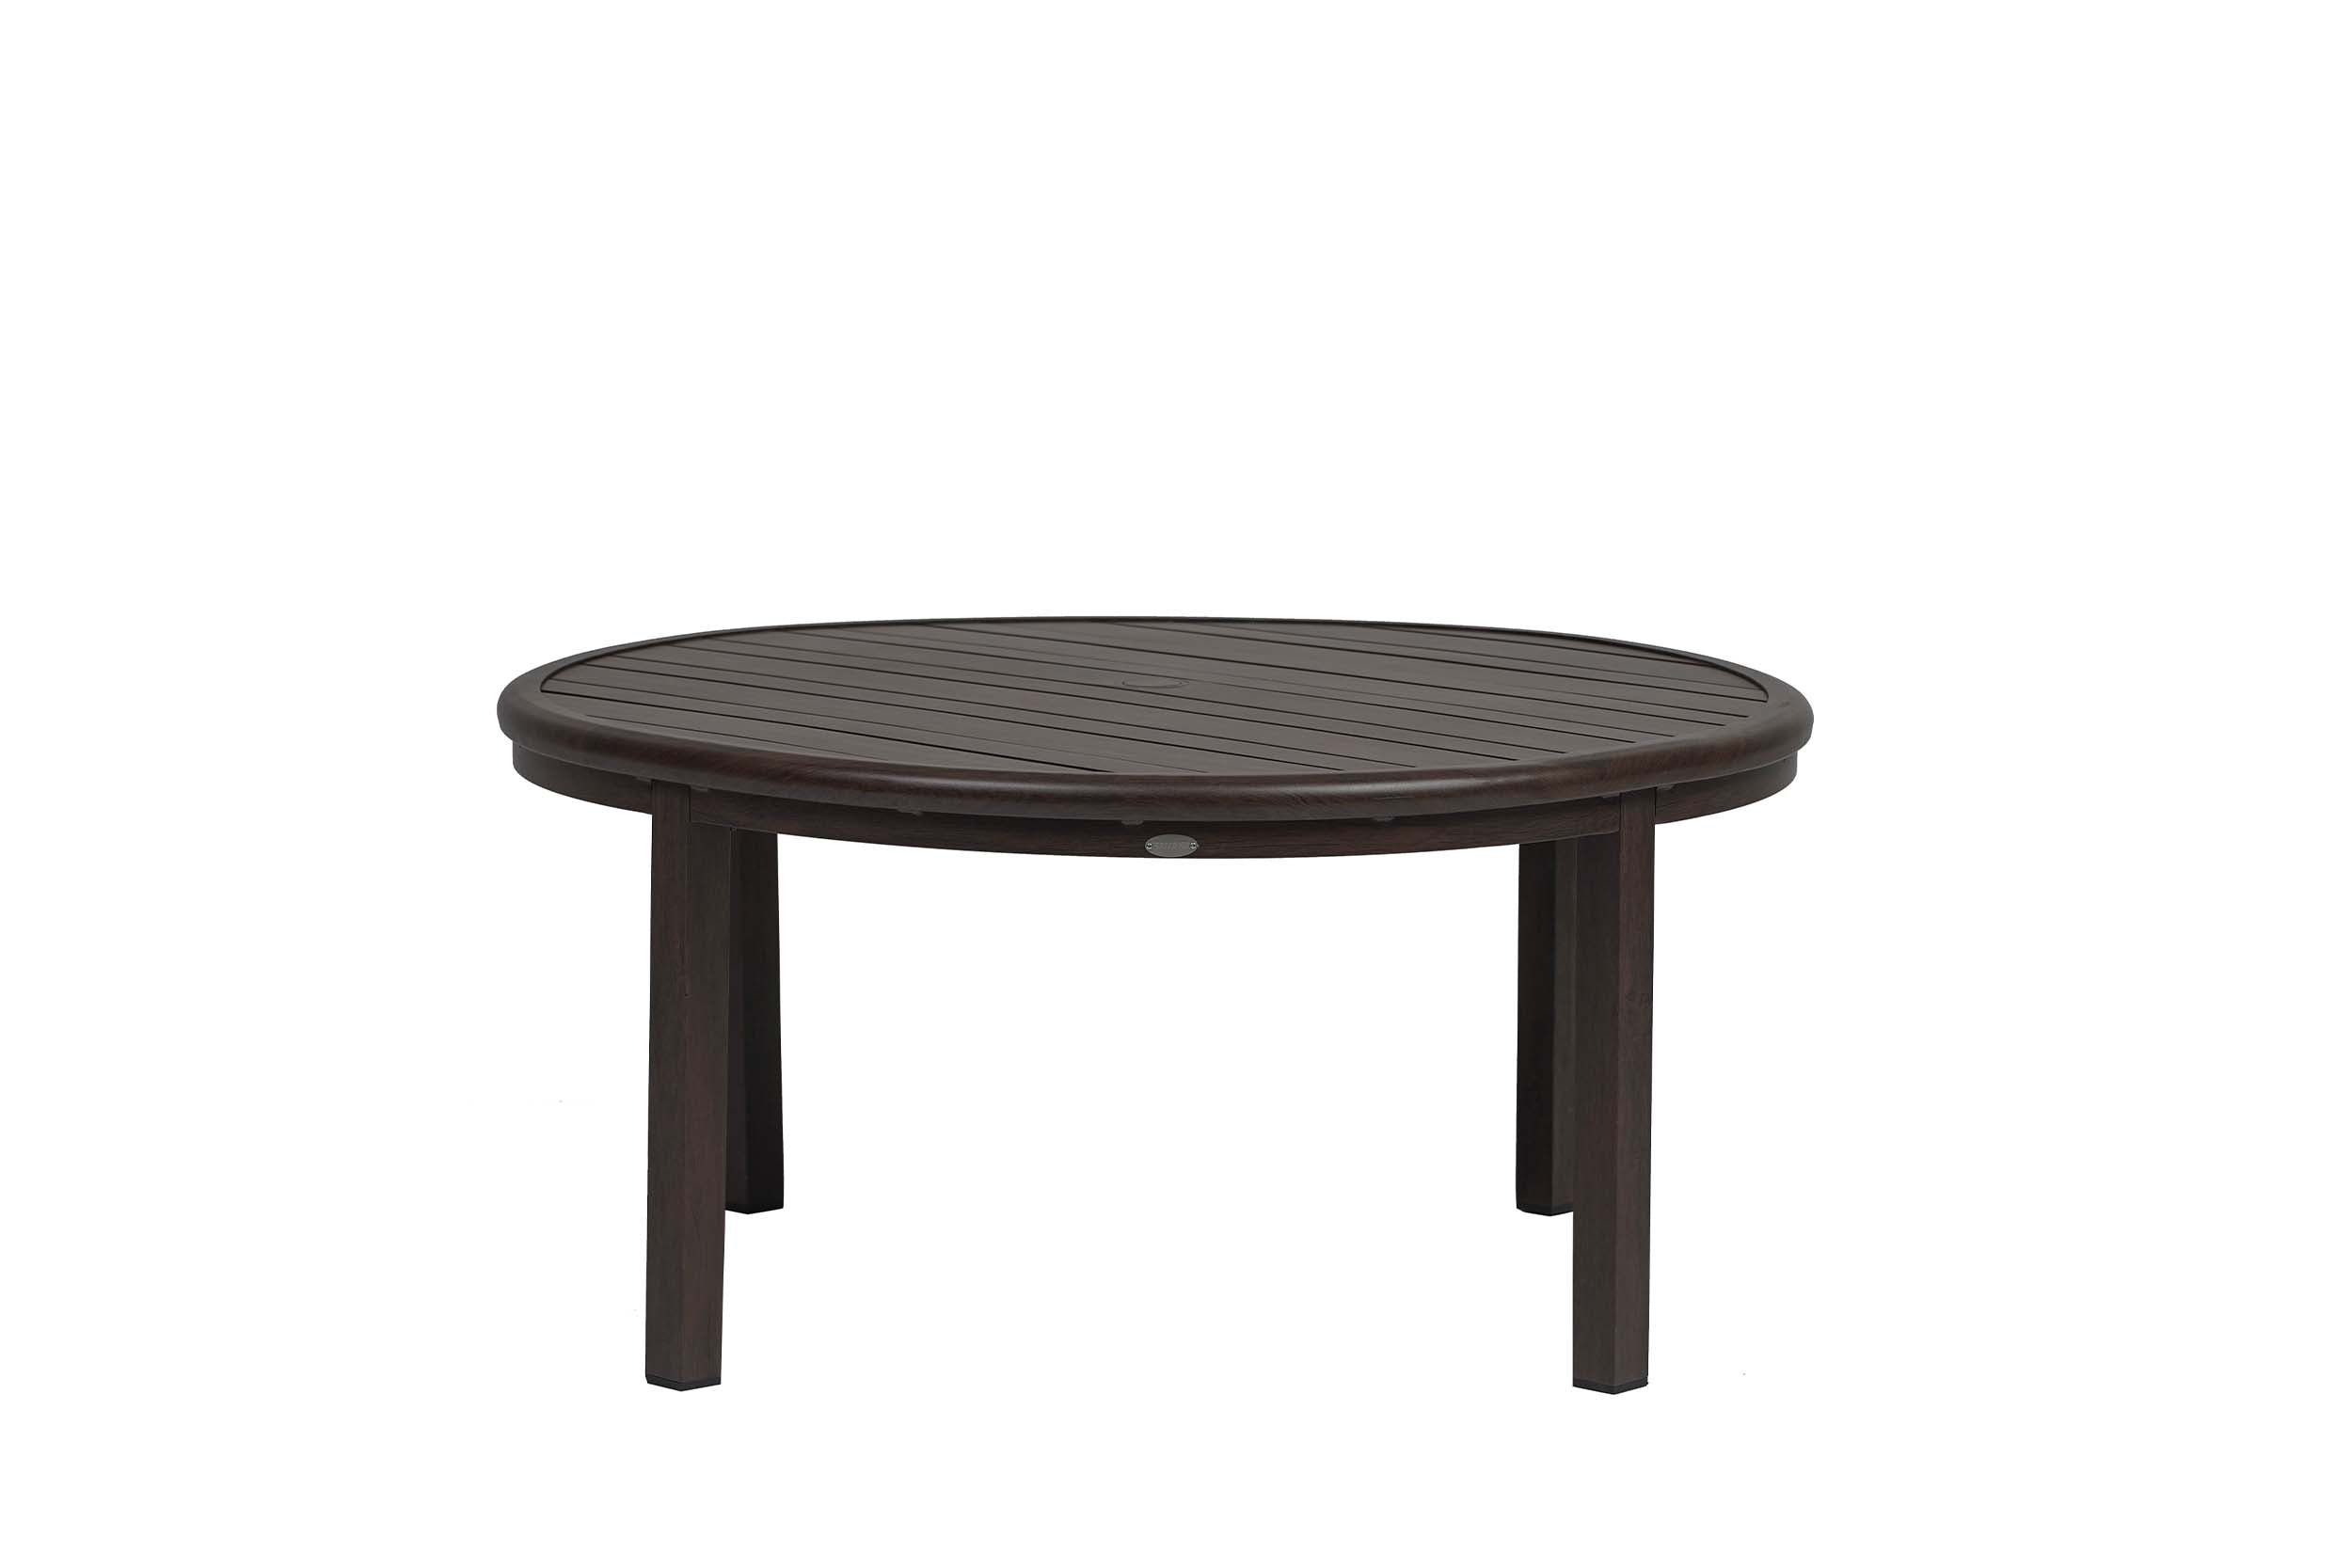 Ratana Canbria 48 inch Round Conversation Table in Hessonite Garnet 12041241